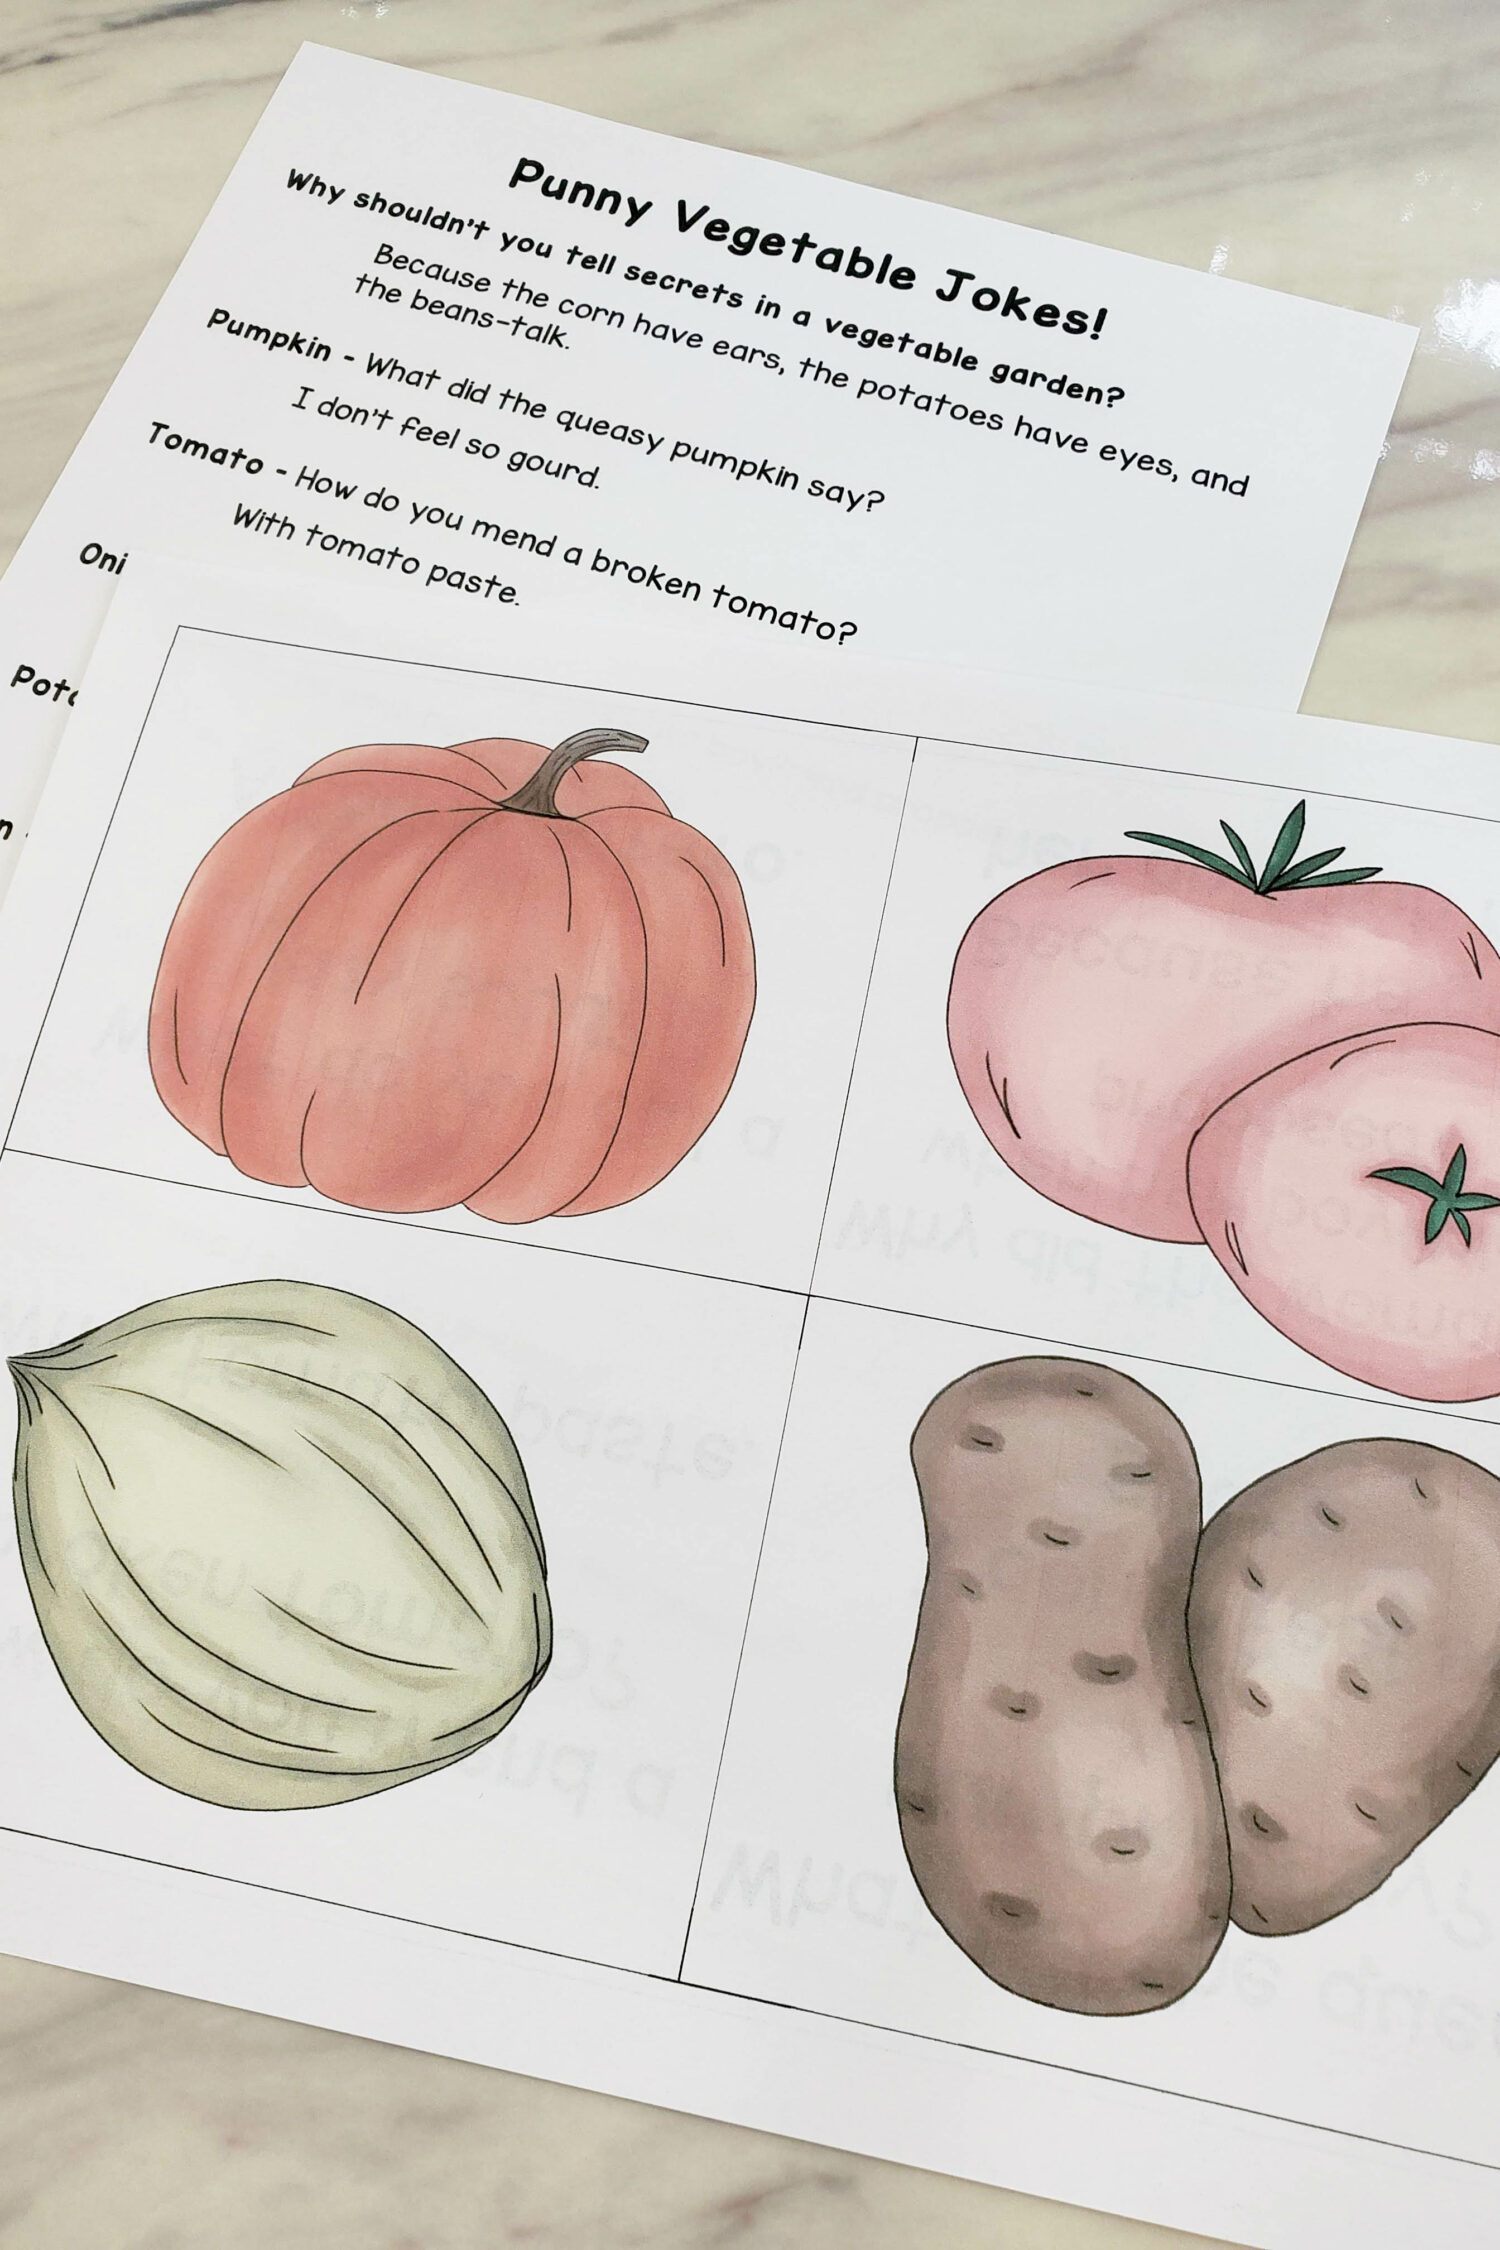 Garden Patch Song Review Game fun singing time idea for LDS Primary music leaders! Plant this assortment of veggies and let the kids "pick" the produce! Then, play a hot potato game and share these cute vegetable puns! Includes printable song helps.